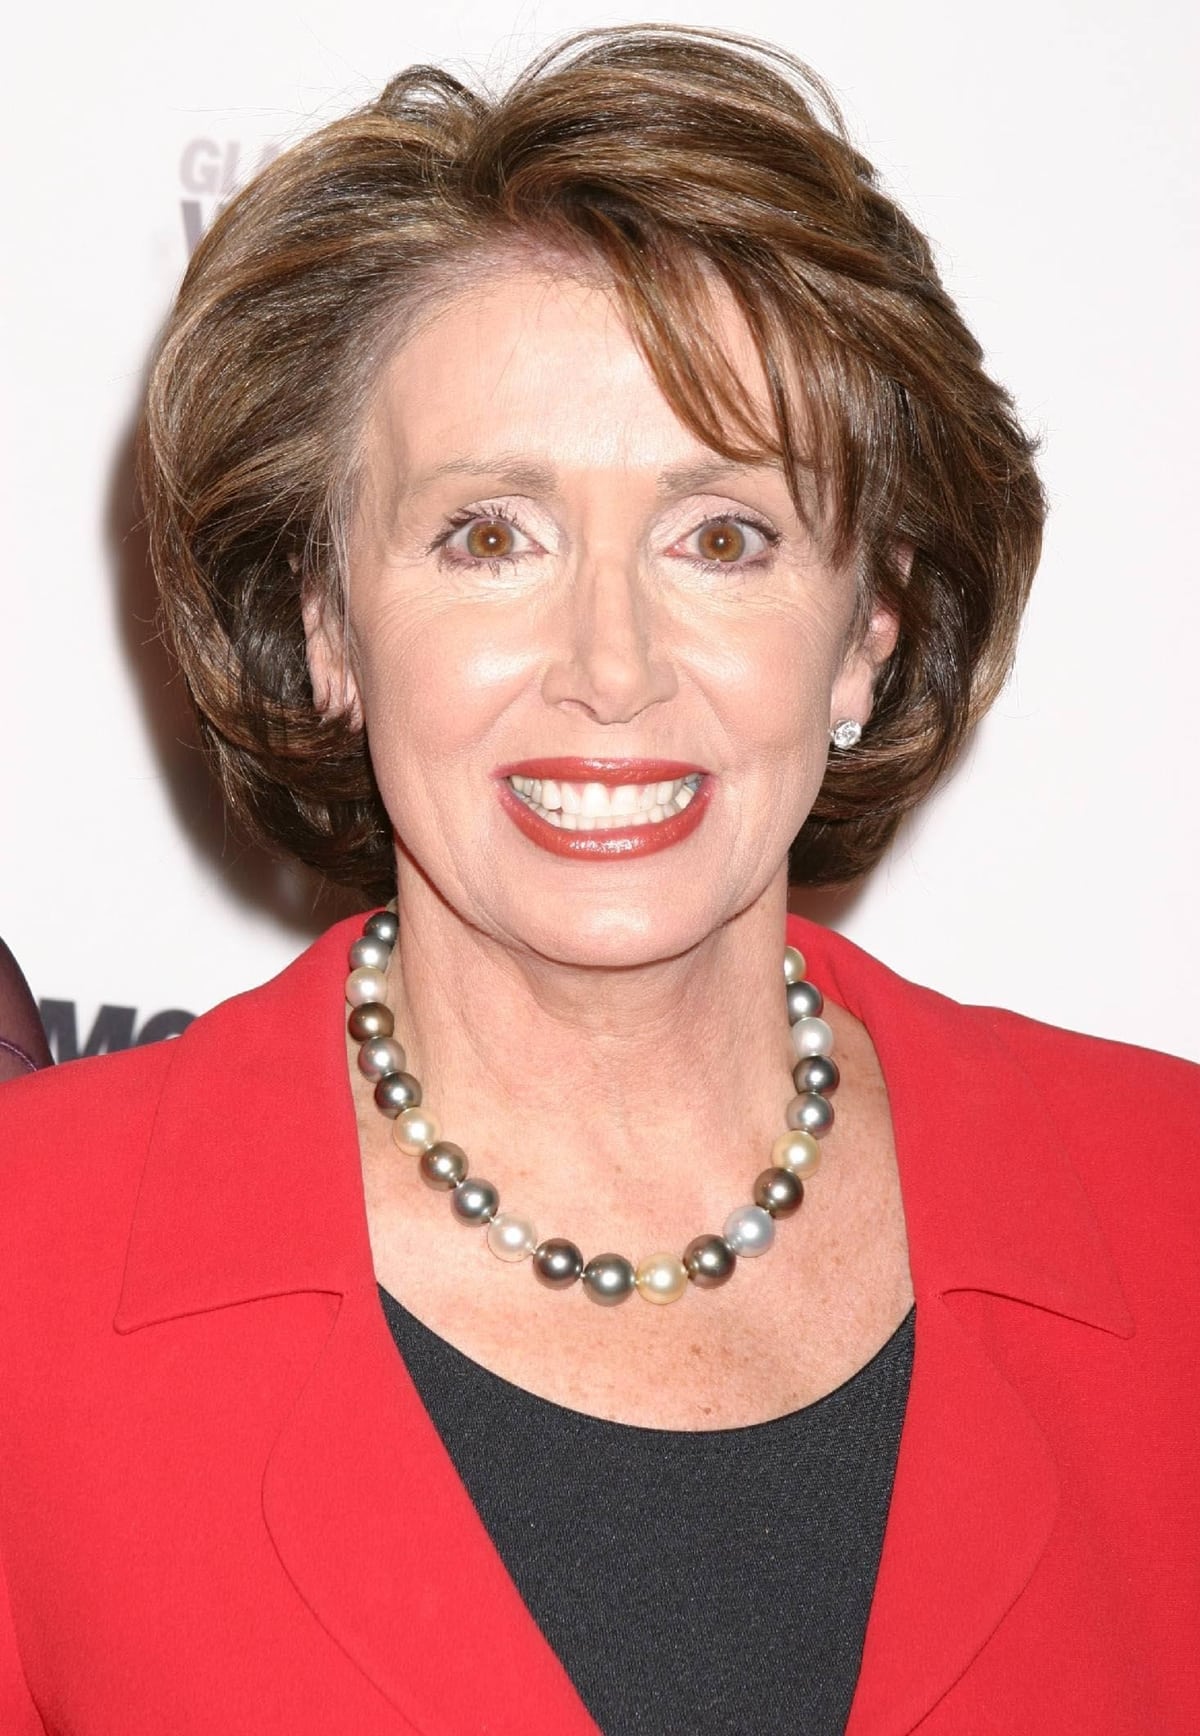 Nancy Pelosi attends the 15th Annual Glamour "Women of the Year" Awards